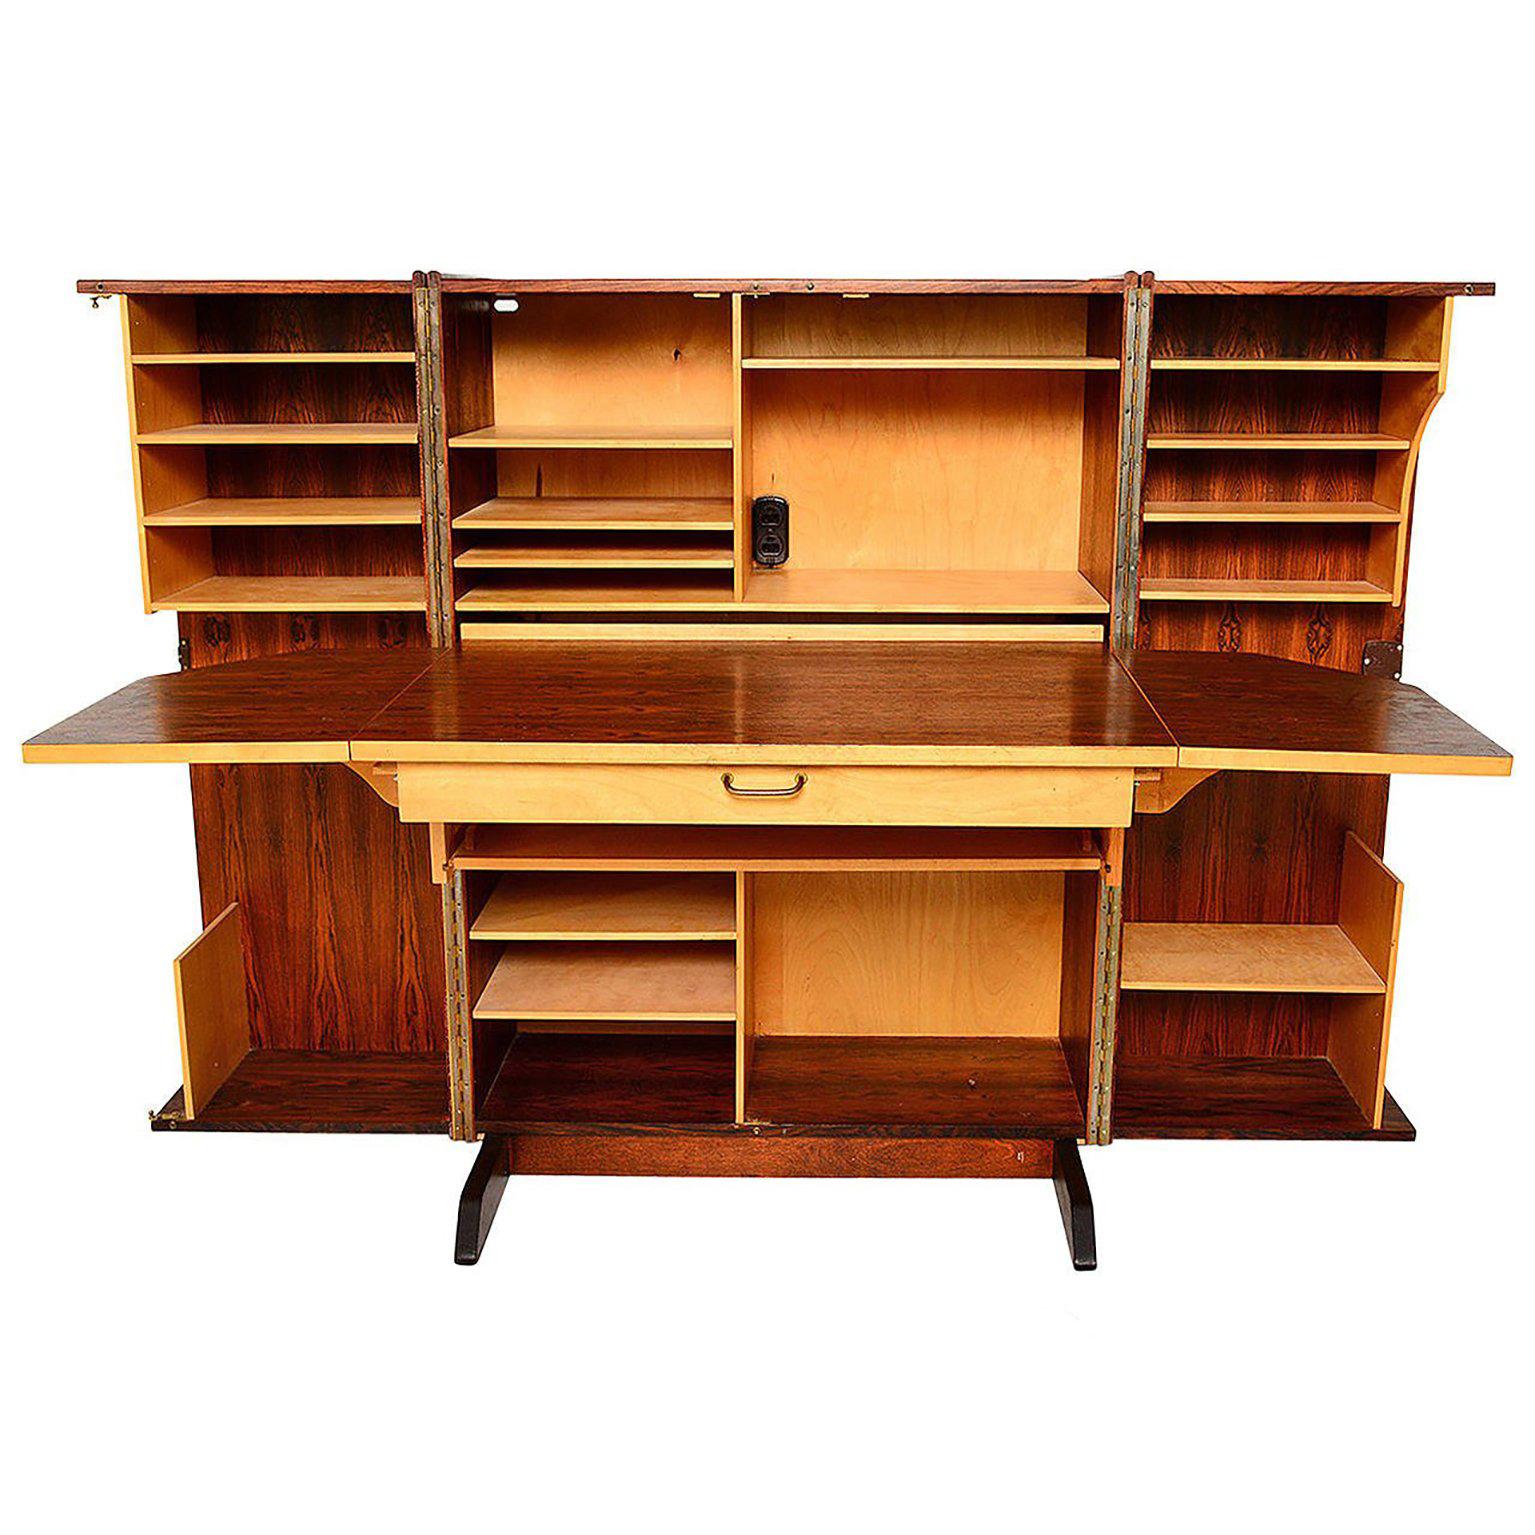 For your consideration a very rare and hard to find hideaway desk in exotic rosewood.

When the desk is closed it show a nice cabinet beautifully finished with exotic rosewood. Once you open the desk, the pull-out area showcase a large writing area